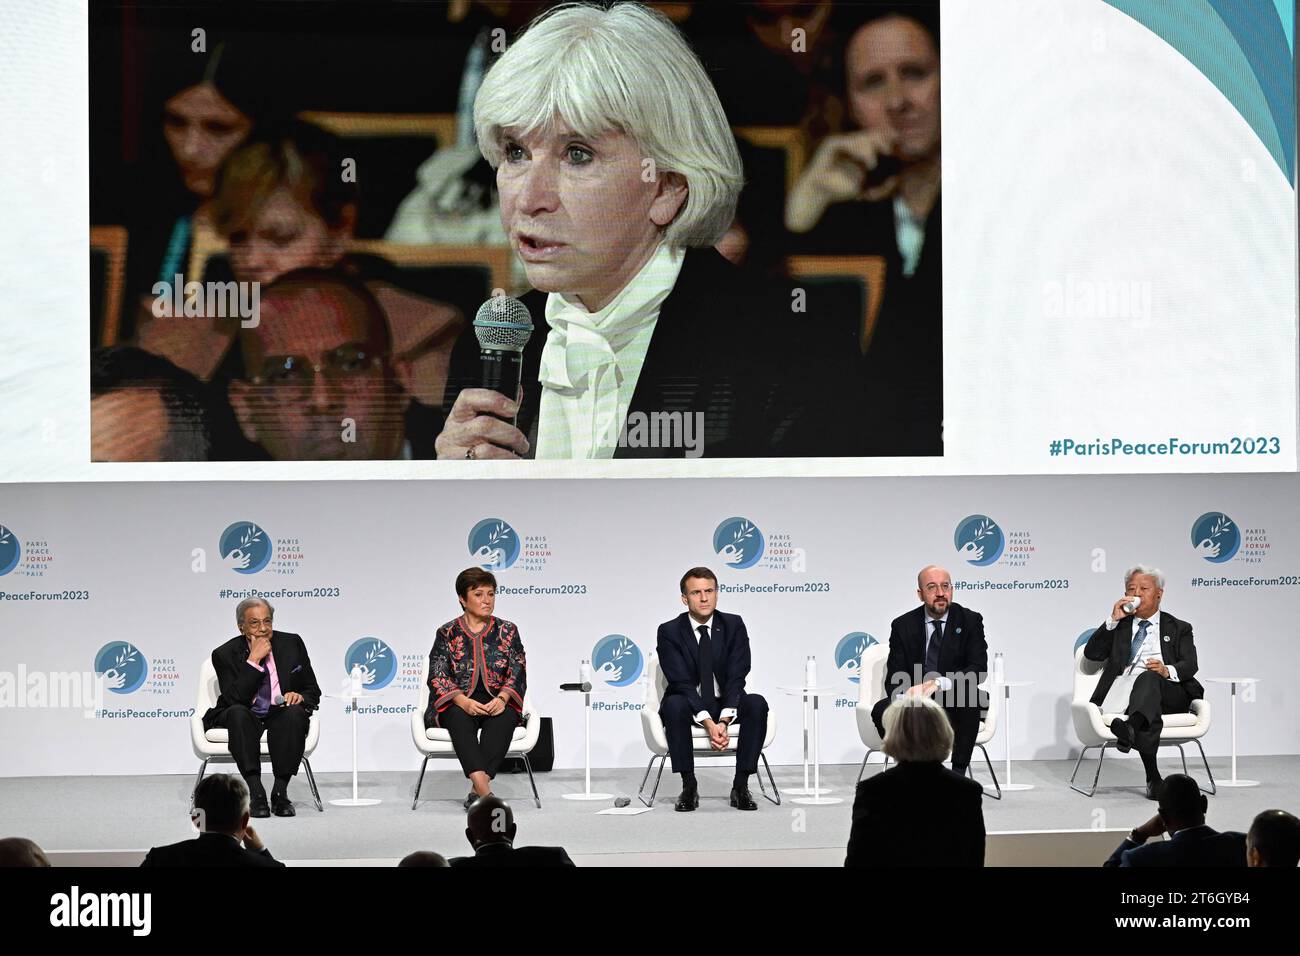 NK Singh, Ristalina Georgieva (IMF), President Emmanuel Macron, President of the European Council Charles Michel and Jin Liqun (AIIB) Laurence Tubiana on screen attending the 6th edition of the Paris Peace Forum at the Palais Brongniart in Paris, France on November 10, 2023. Representatives from states, international organisations, businesses, development banks or NGOs are expected to attend the event, held from November 10 to 11, 2023. This year's themes are protection of the planet and people, trust and safety in the digital world, sustainable development, crafting peace and building a safer Stock Photo